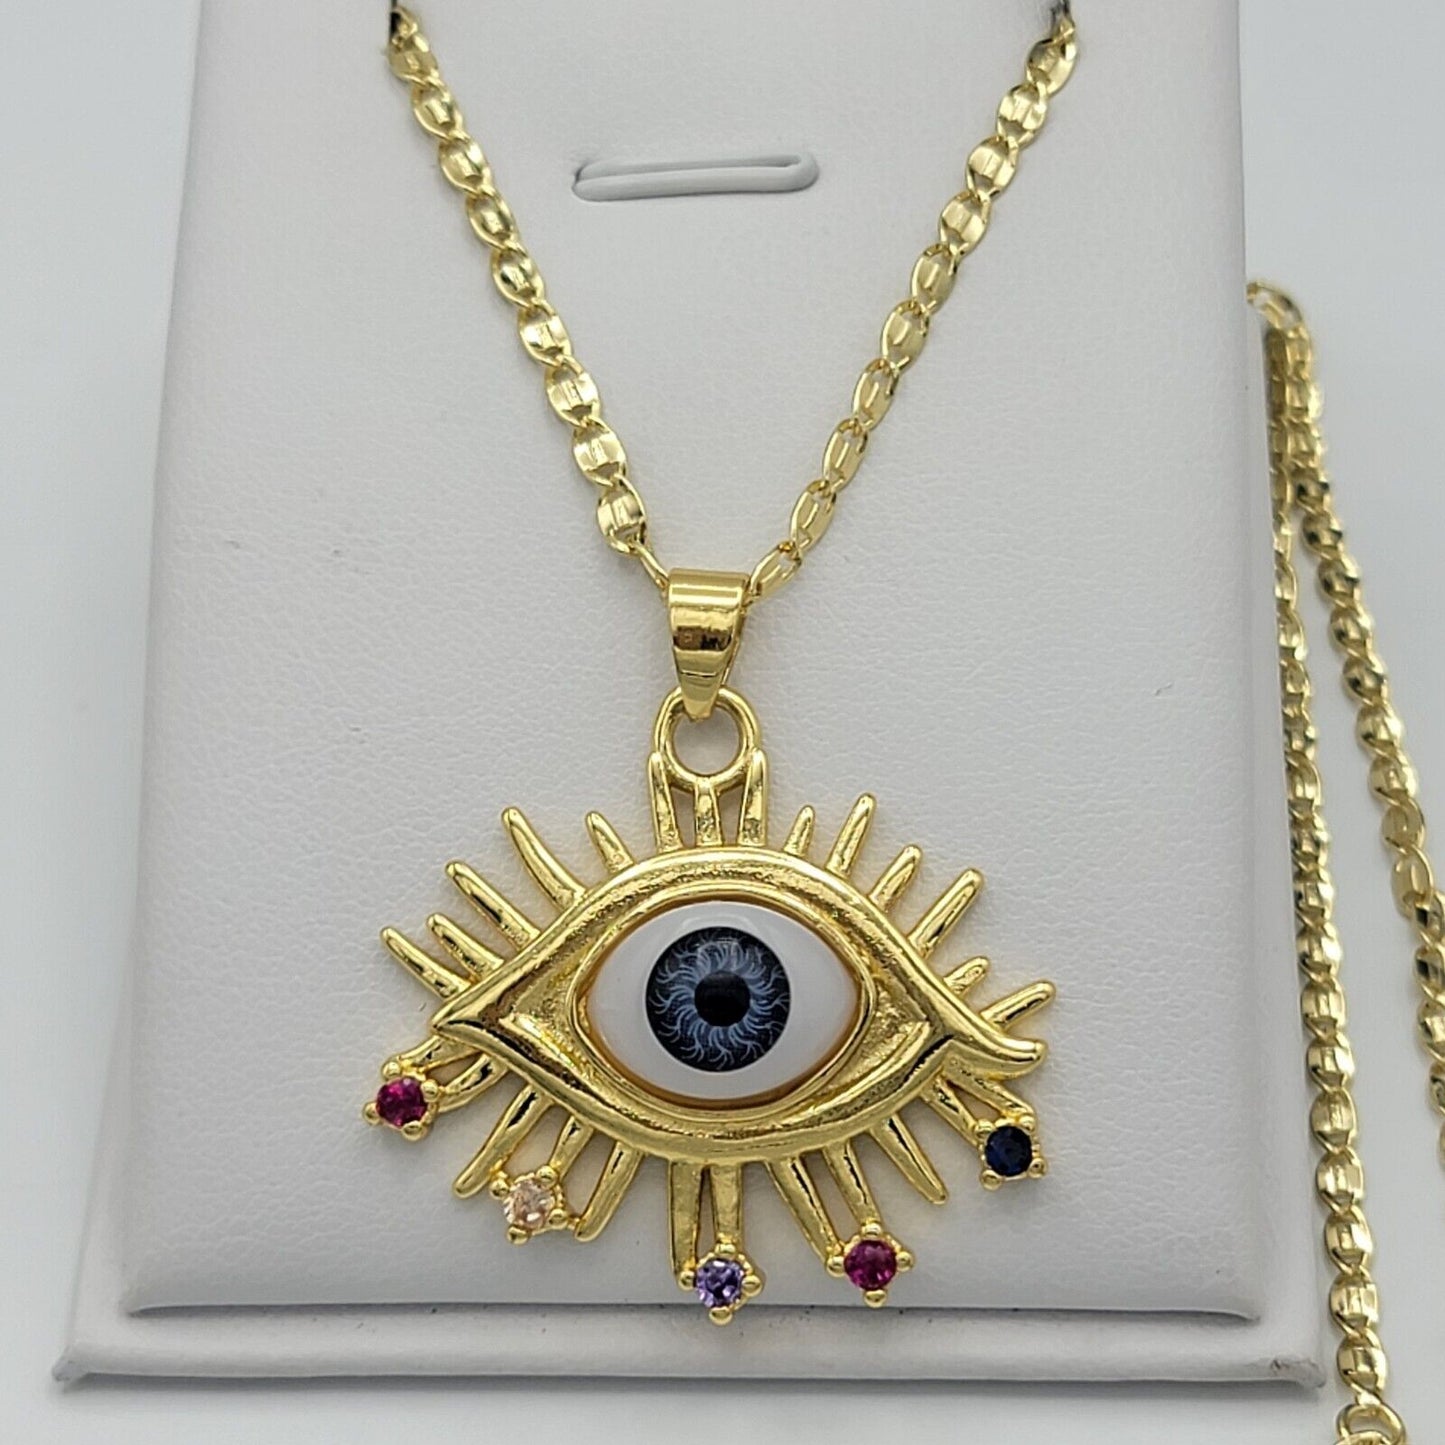 Necklaces - 14K Gold Plated. Blue Eye Pendant & Chain.